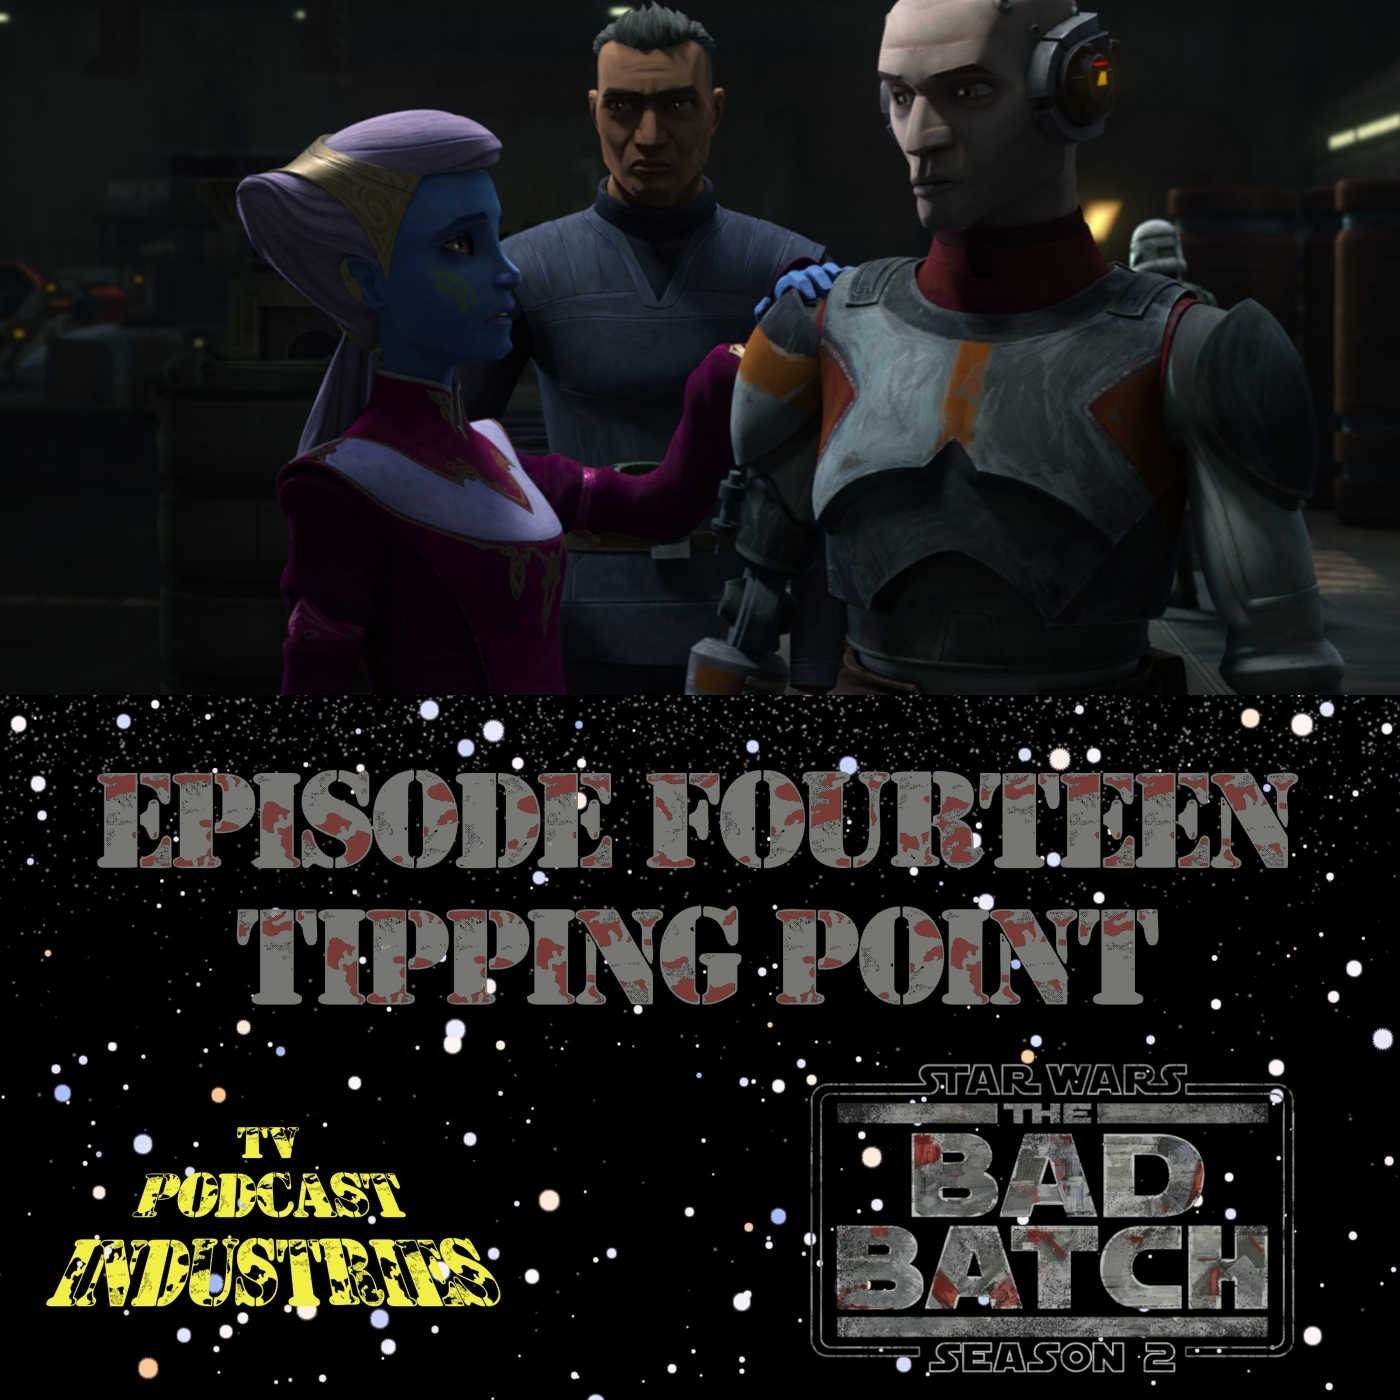 Star Wars The Bad Batch 214 "Tipping Point"